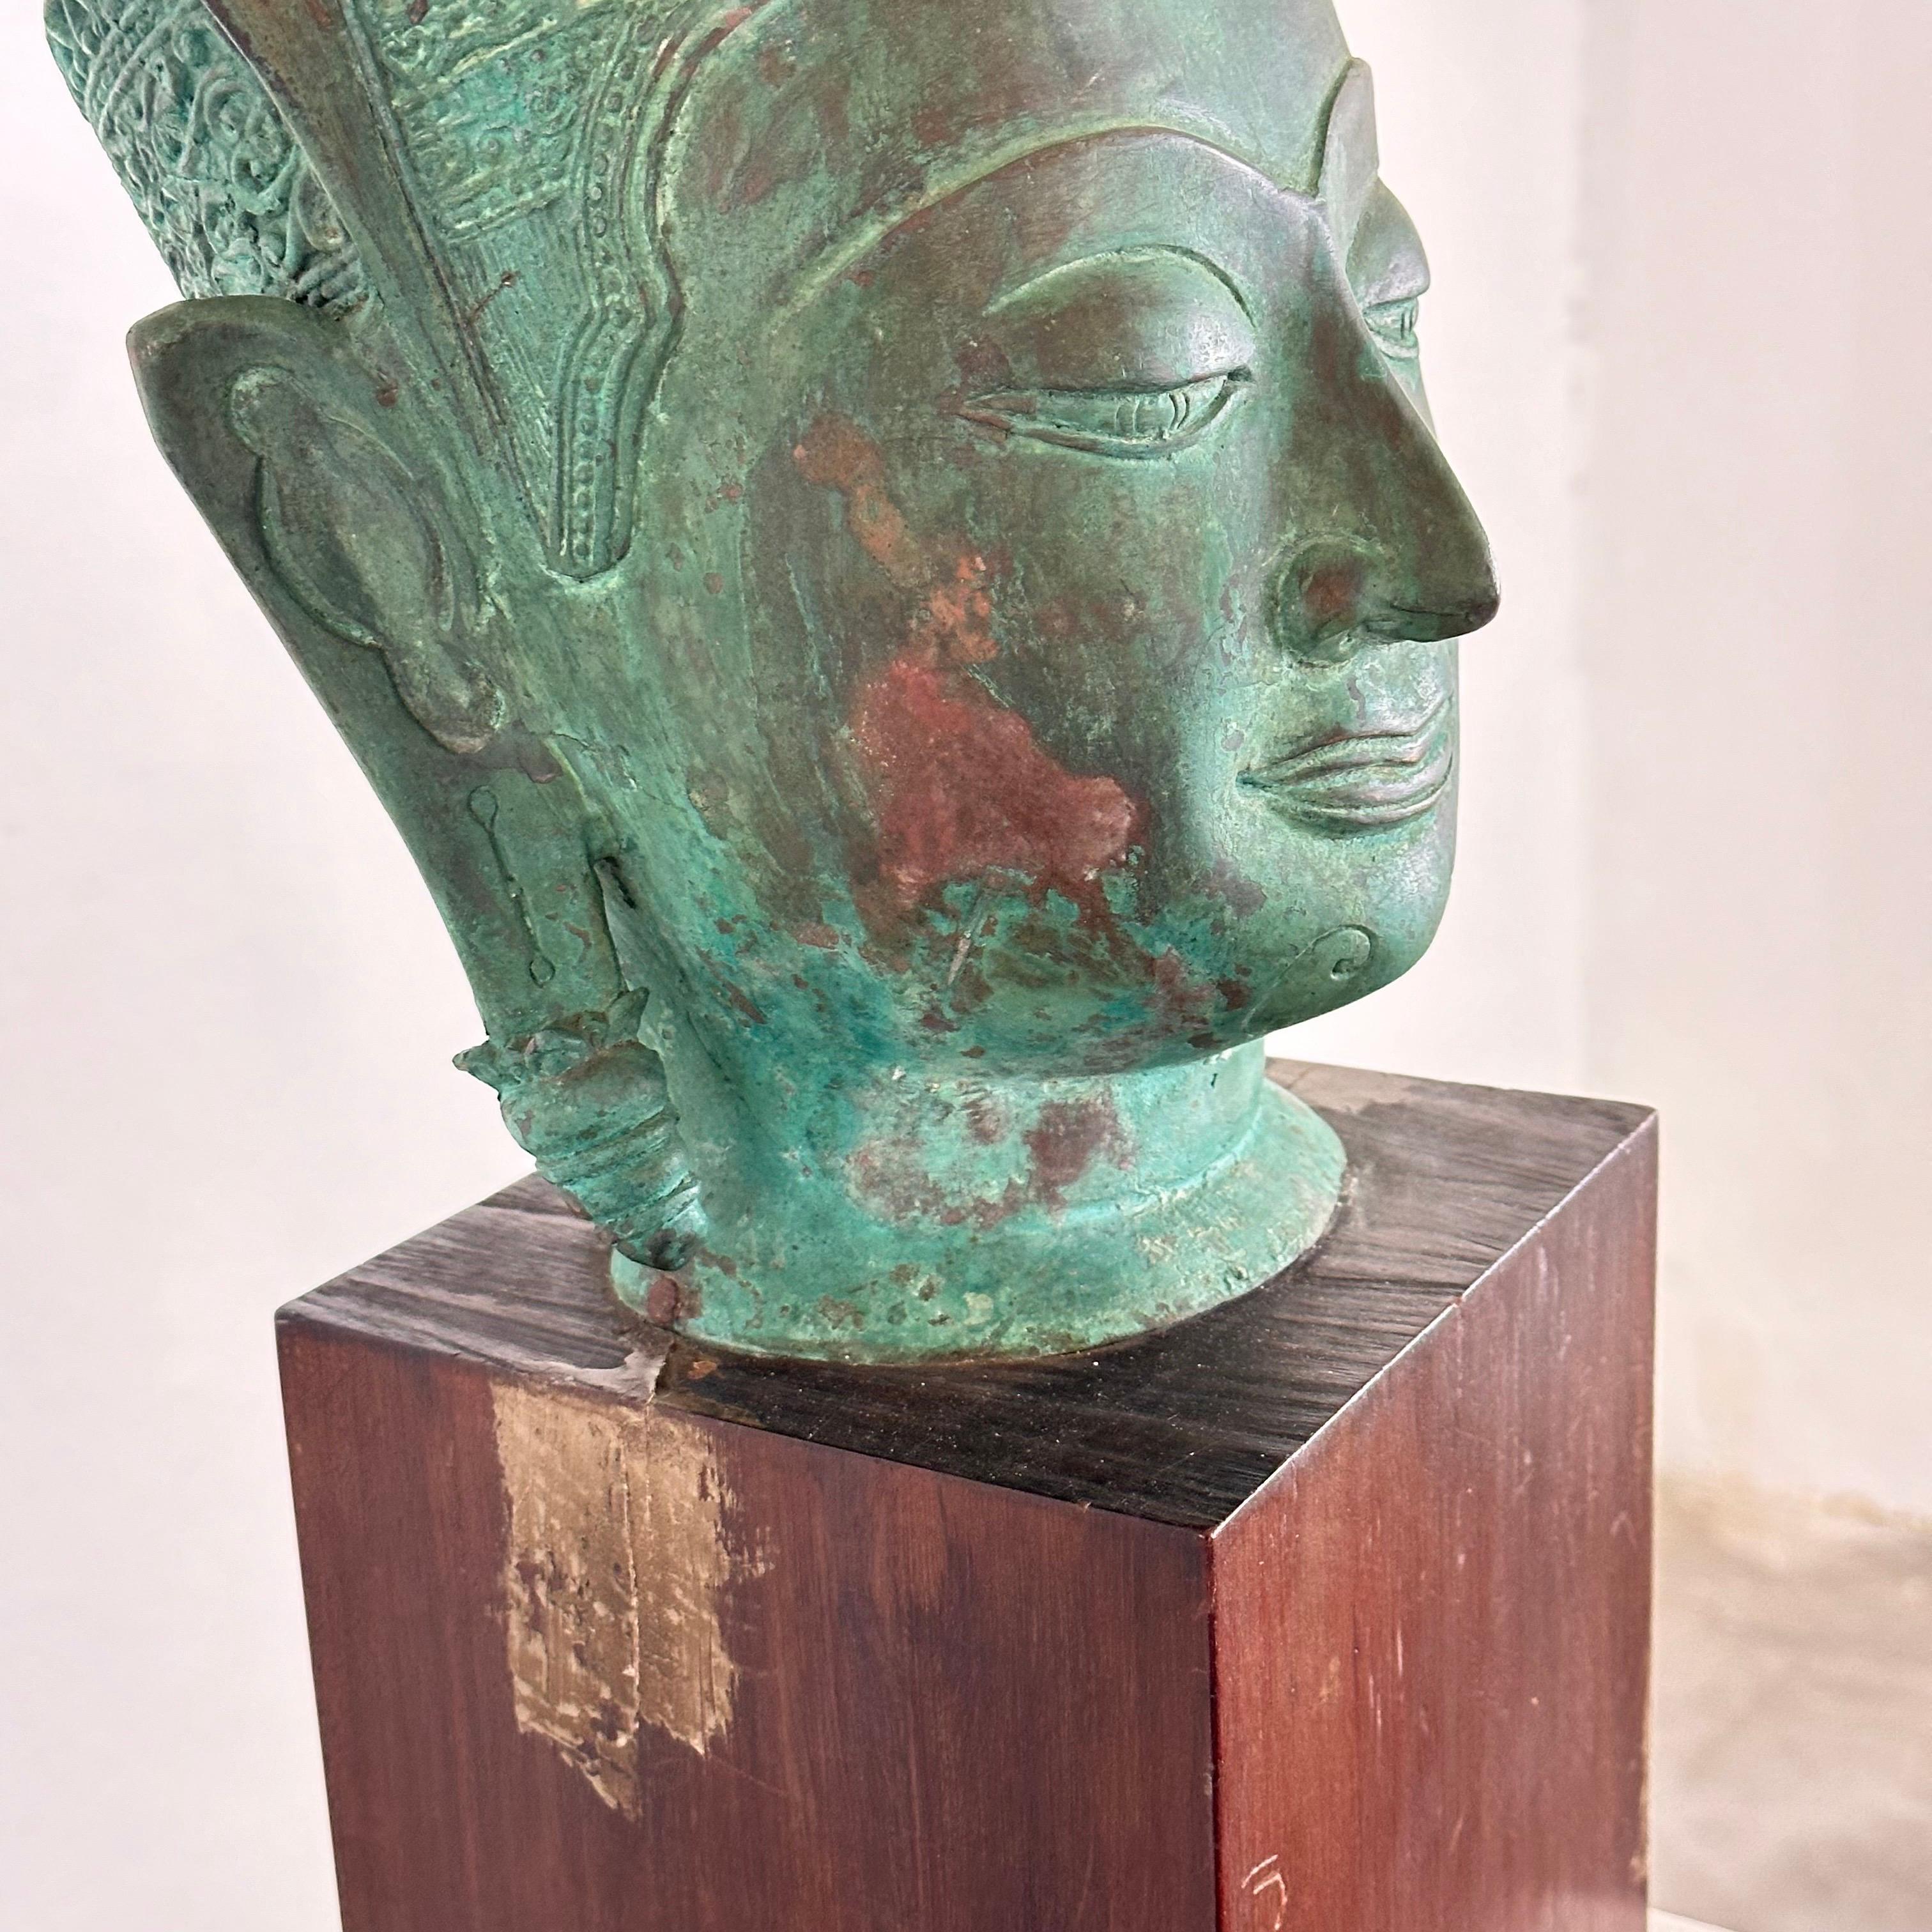 Exquisite 19th Century Thai Bronze Buddha Head on Wooden Base For Sale 2